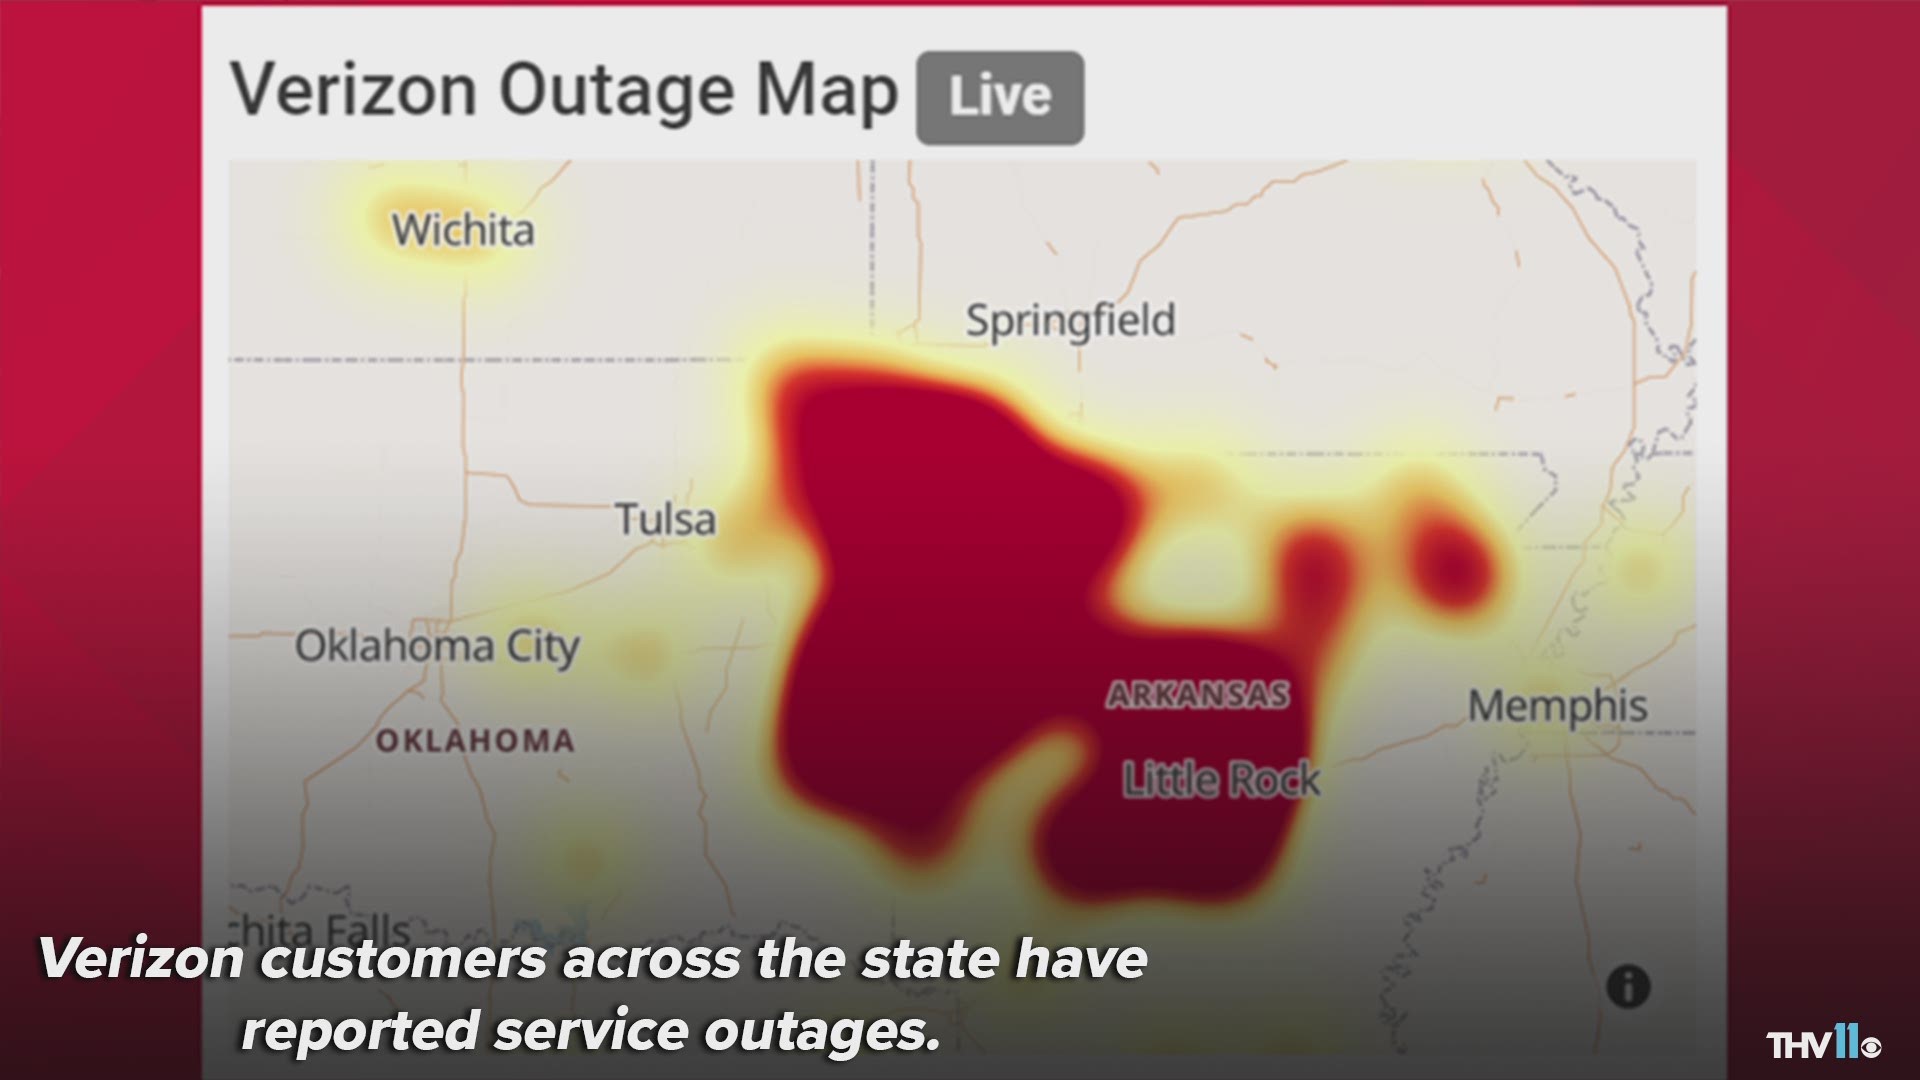 Verizon customers across the state have reported an outage.